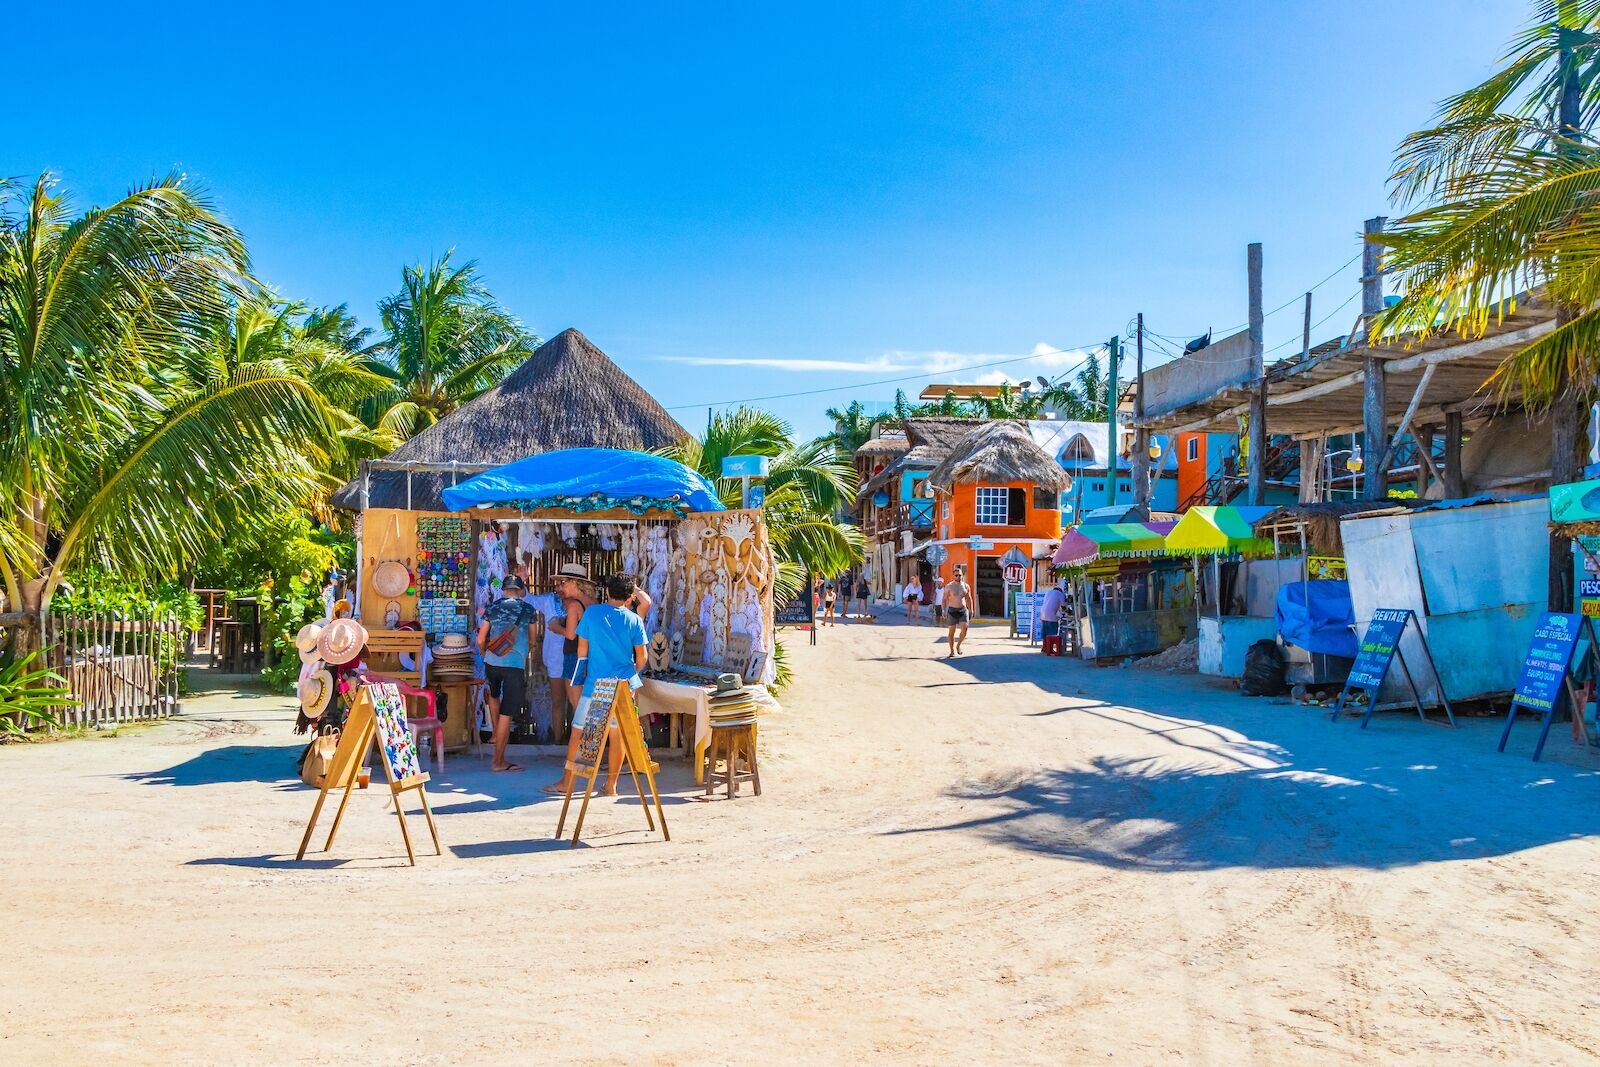 Holbox Mexico 21. December 2021 Panorama landscape view on beautiful Holbox island sandbank and beach with entrance people stores bars and palm trees in Quintana Roo Mexico.